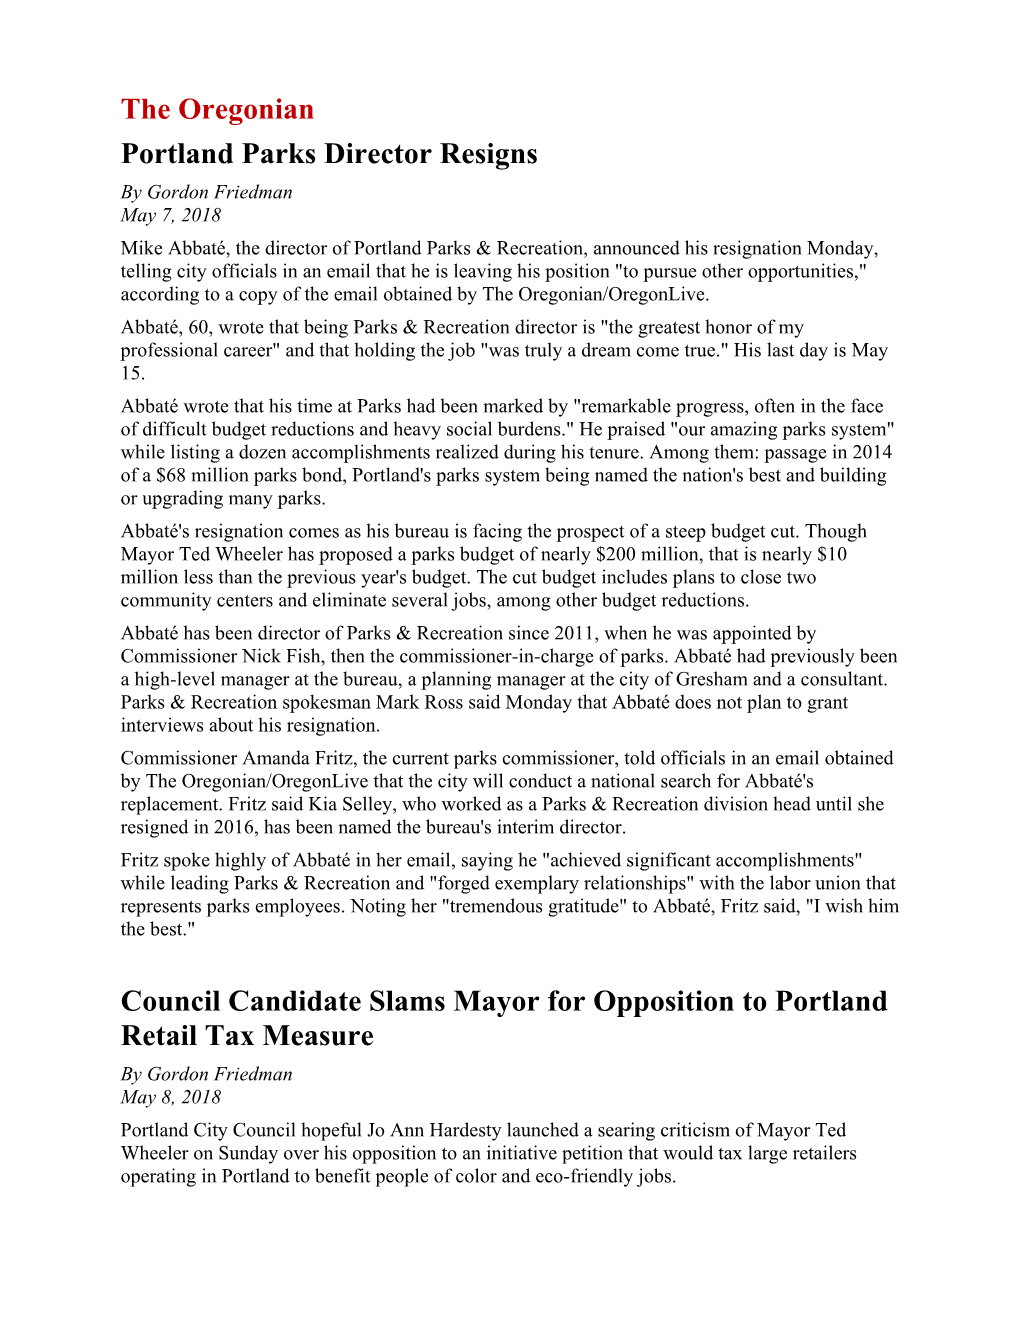 The Oregonian Portland Parks Director Resigns Council